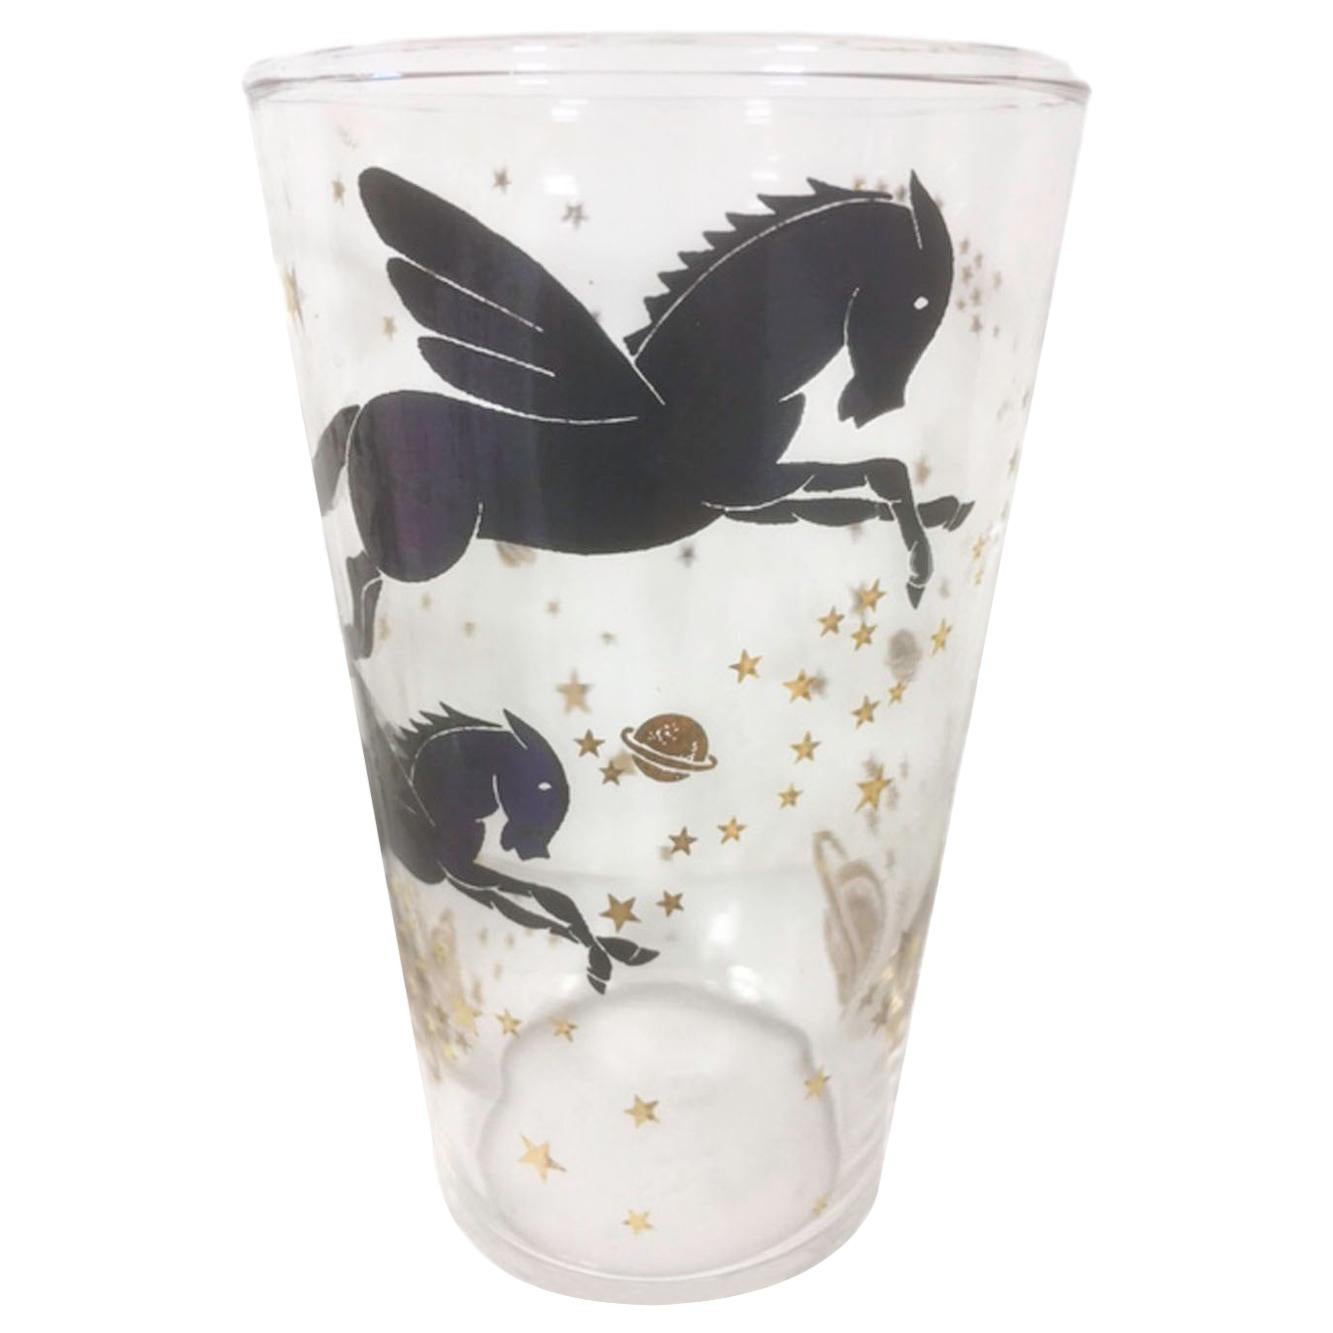 https://a.1stdibscdn.com/vintage-federal-glasses-with-pegasus-among-stars-and-planets-in-black-and-gold-for-sale/1121189/f_236238821620818192041/23623882_master.jpg